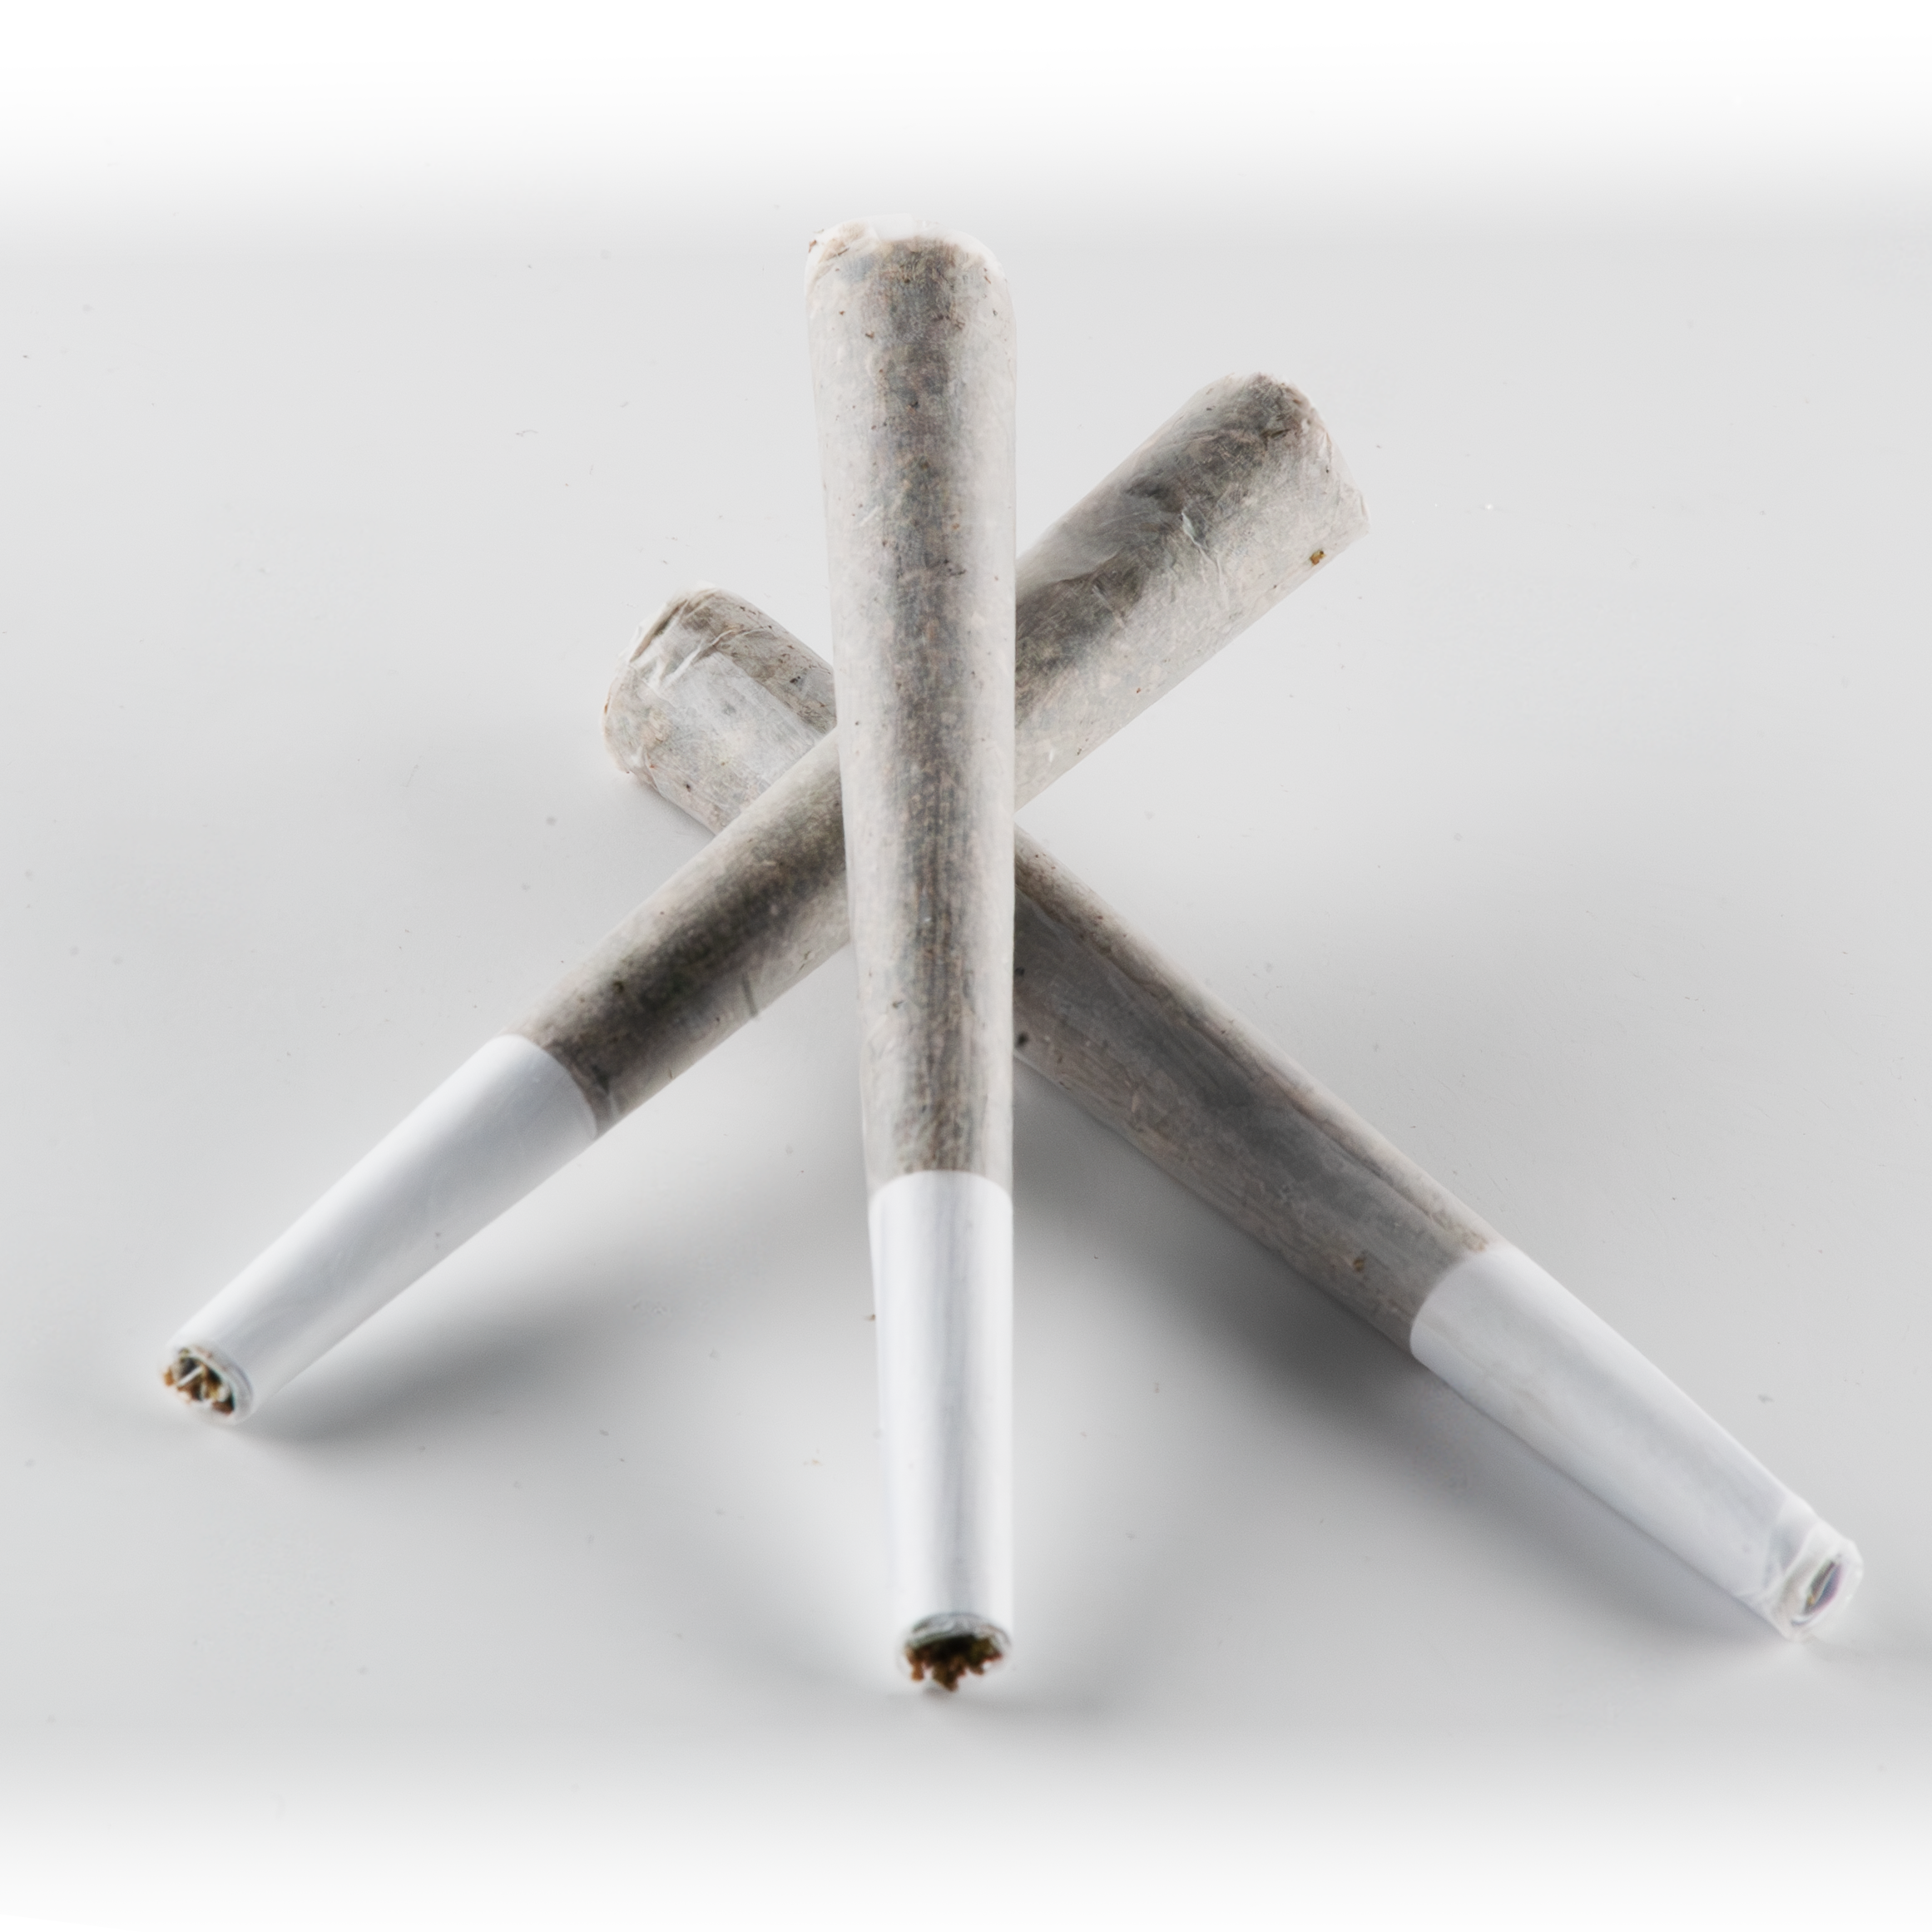 1 Gram Joint (325mg THC-A) - 40 Pack